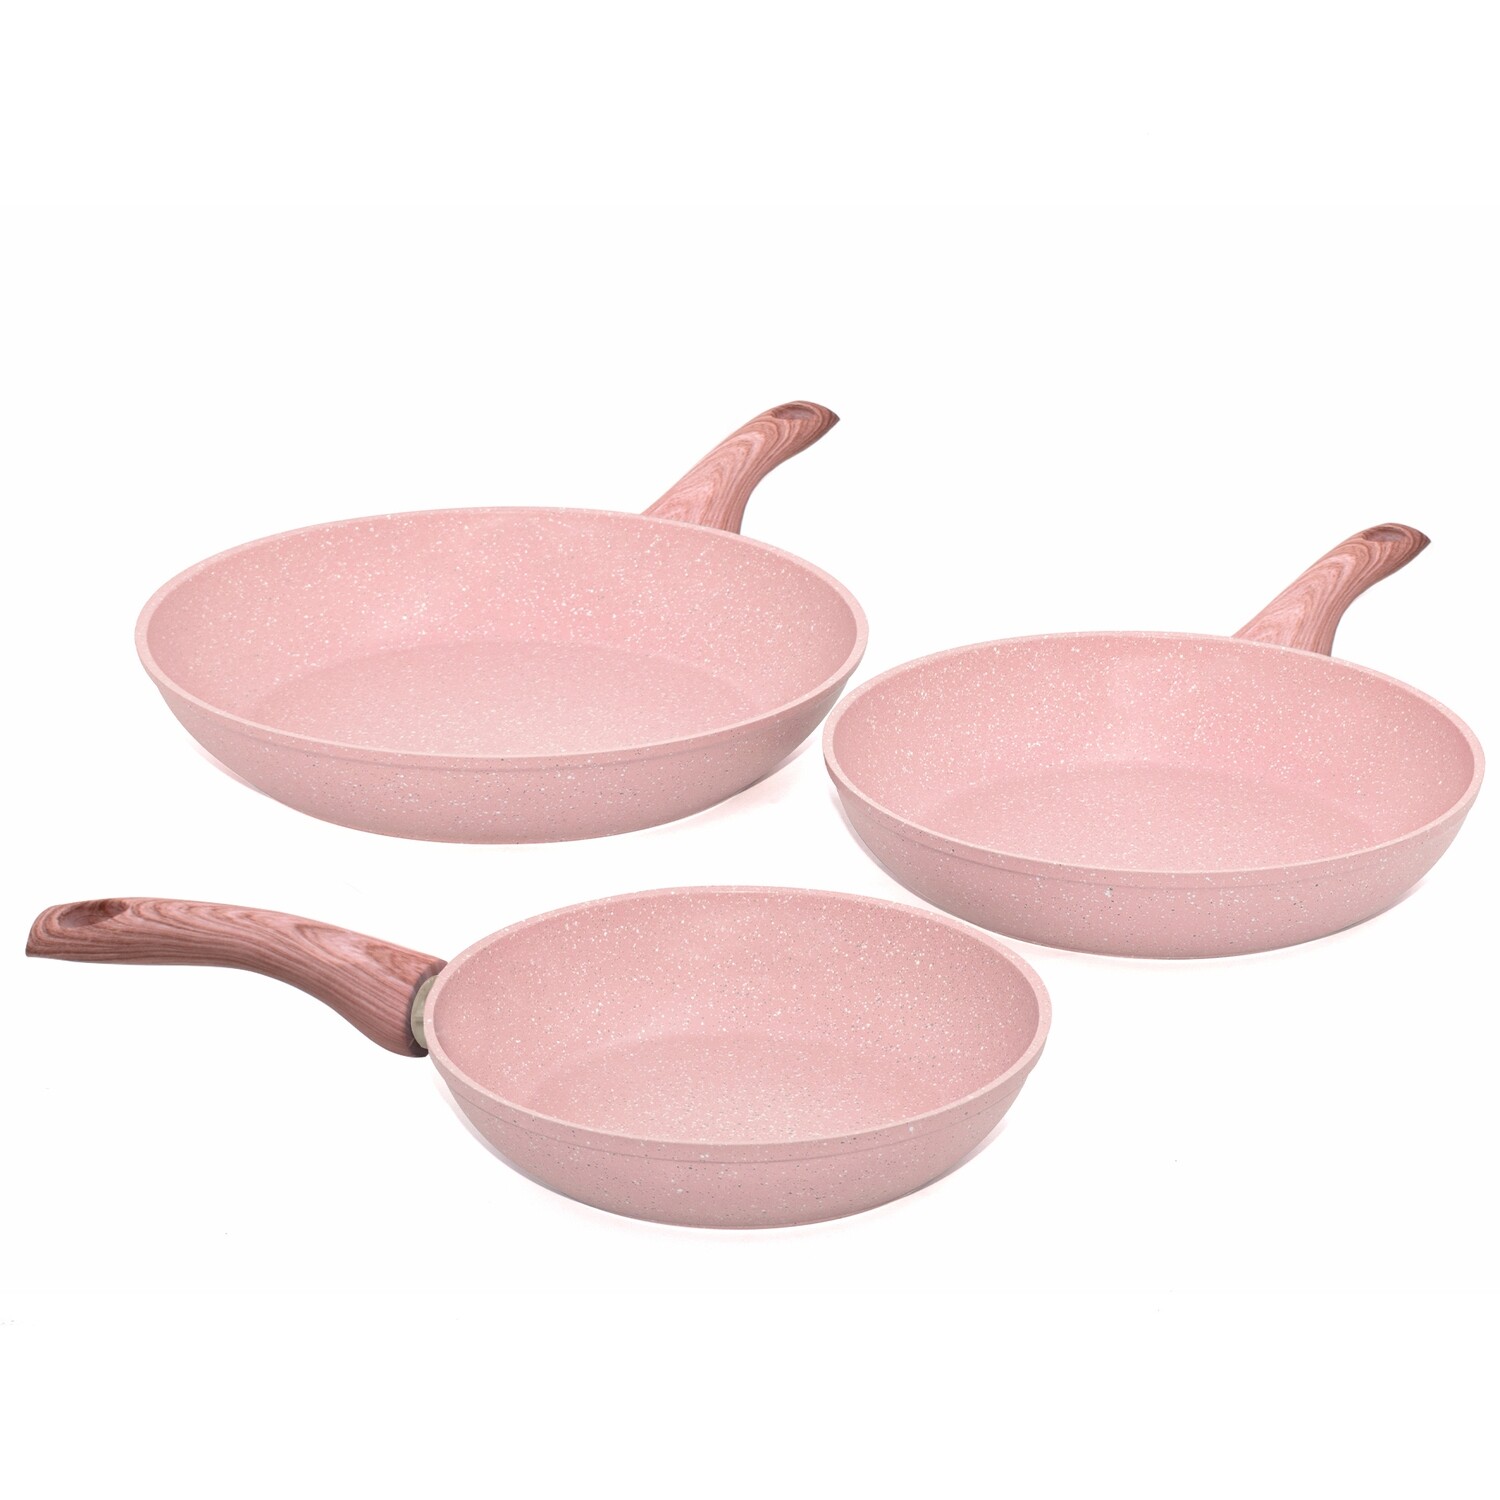 3 pieces cookware set 'Stonerose' with pink wood colour handles